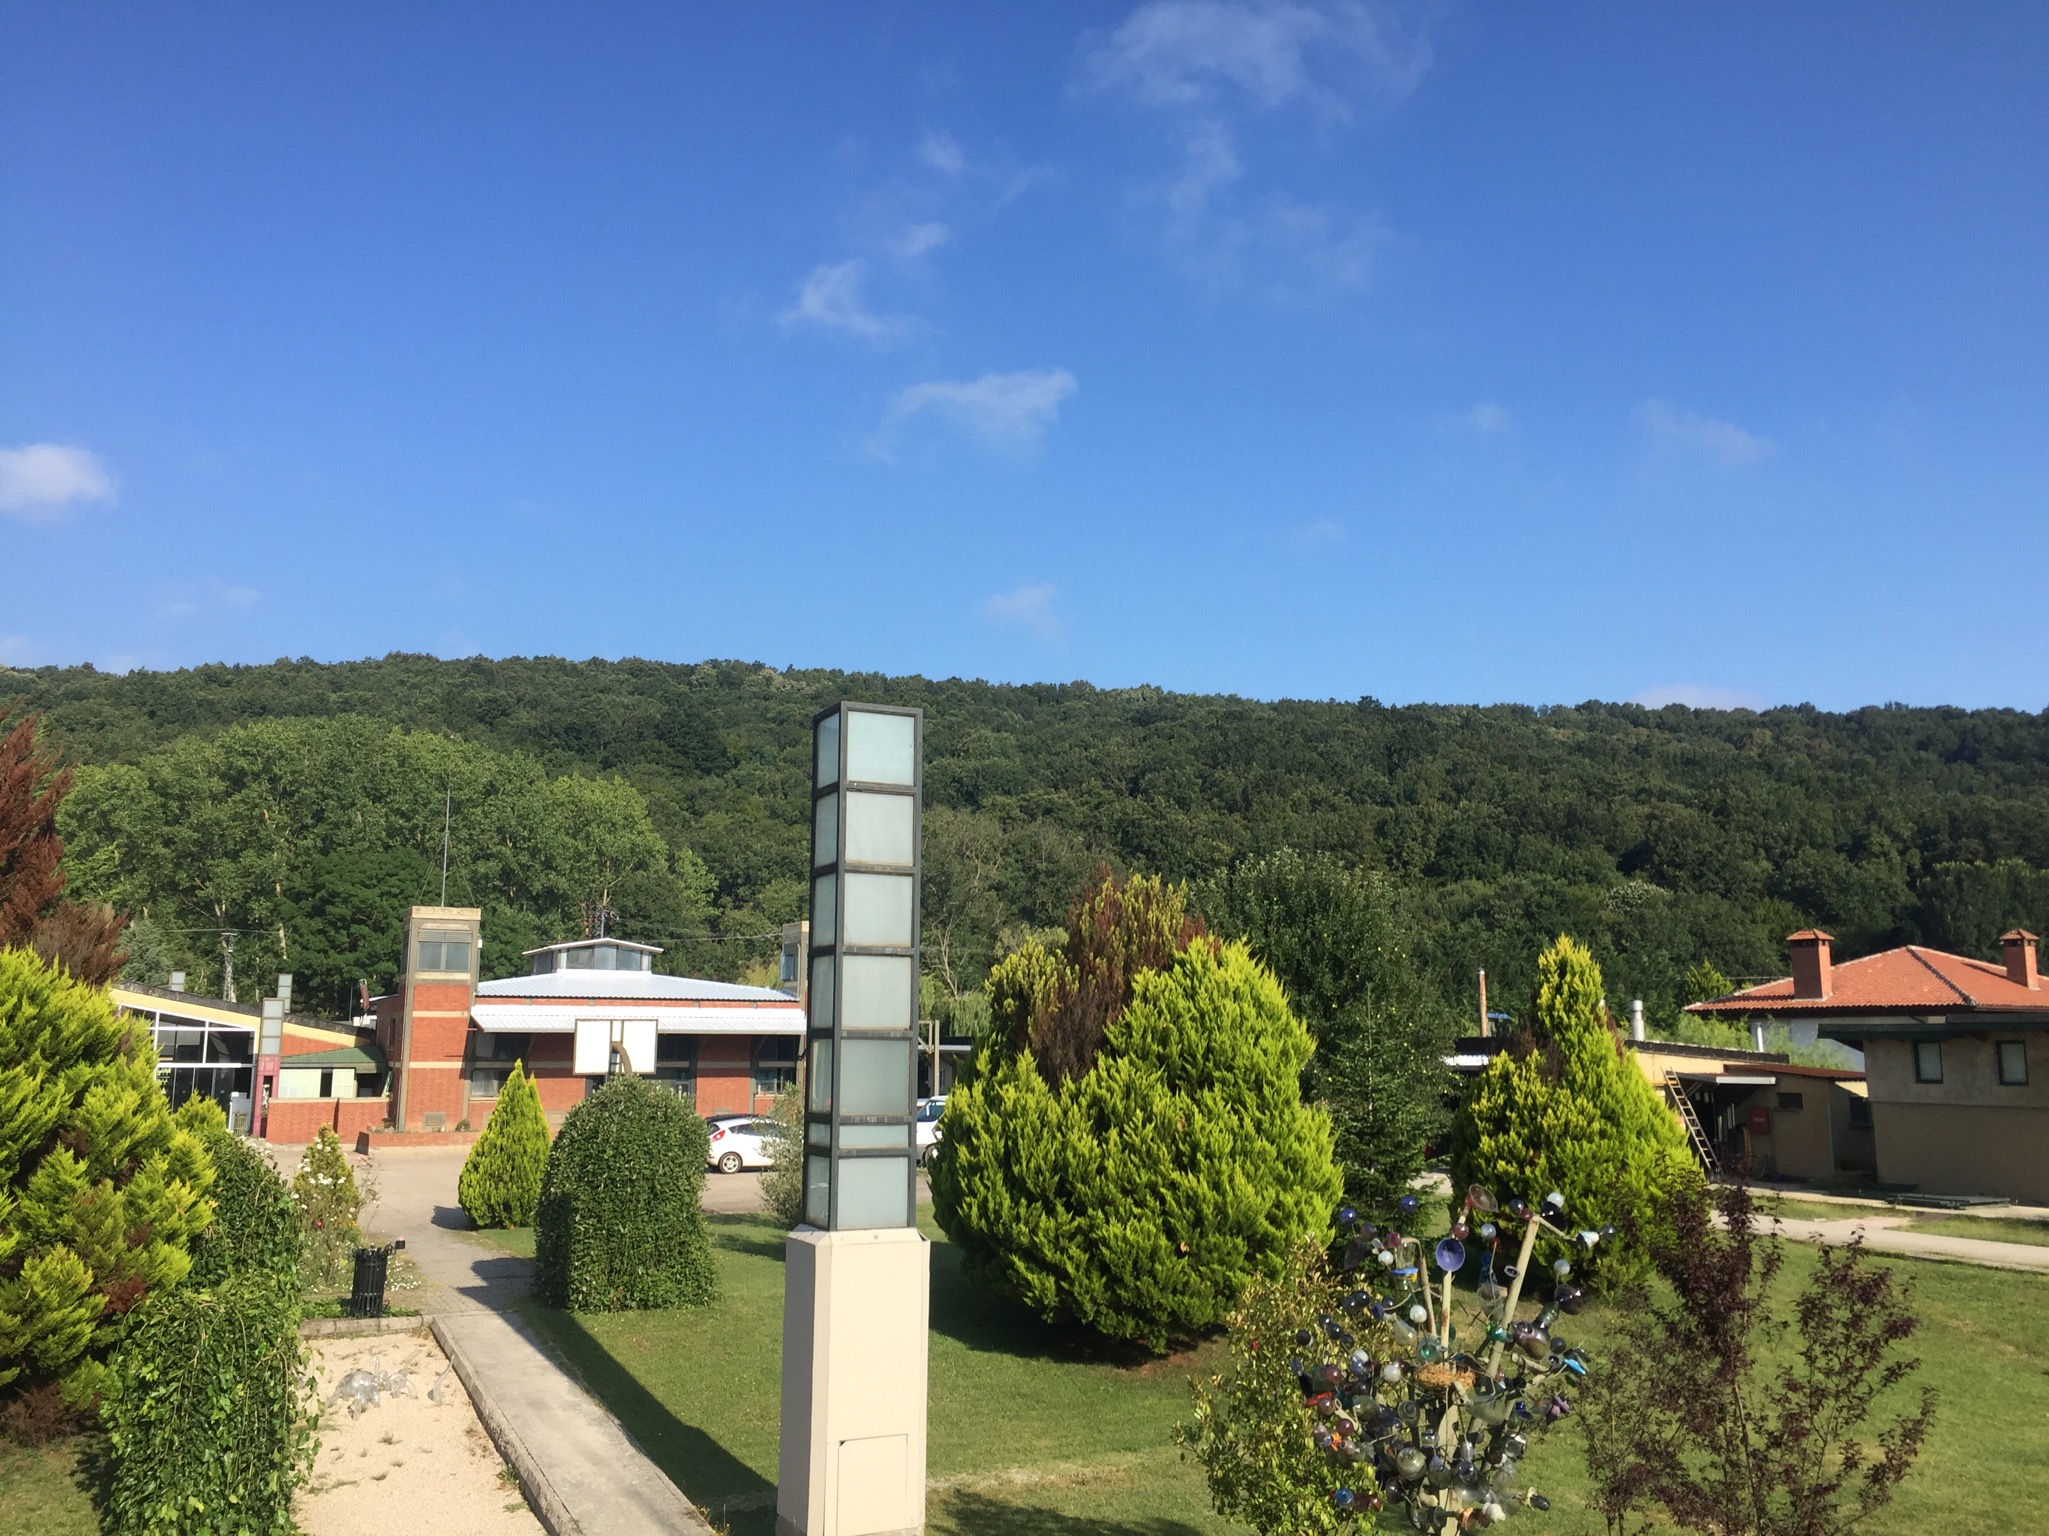  This is a view of the Glass Furnace from the balcony of the dorms. The sky is gorgeous here - it pretty much looked like this every day. The weather was hot (we were there in August), but not too bad - in the 80s or 90s - it was much hotter (and MUC